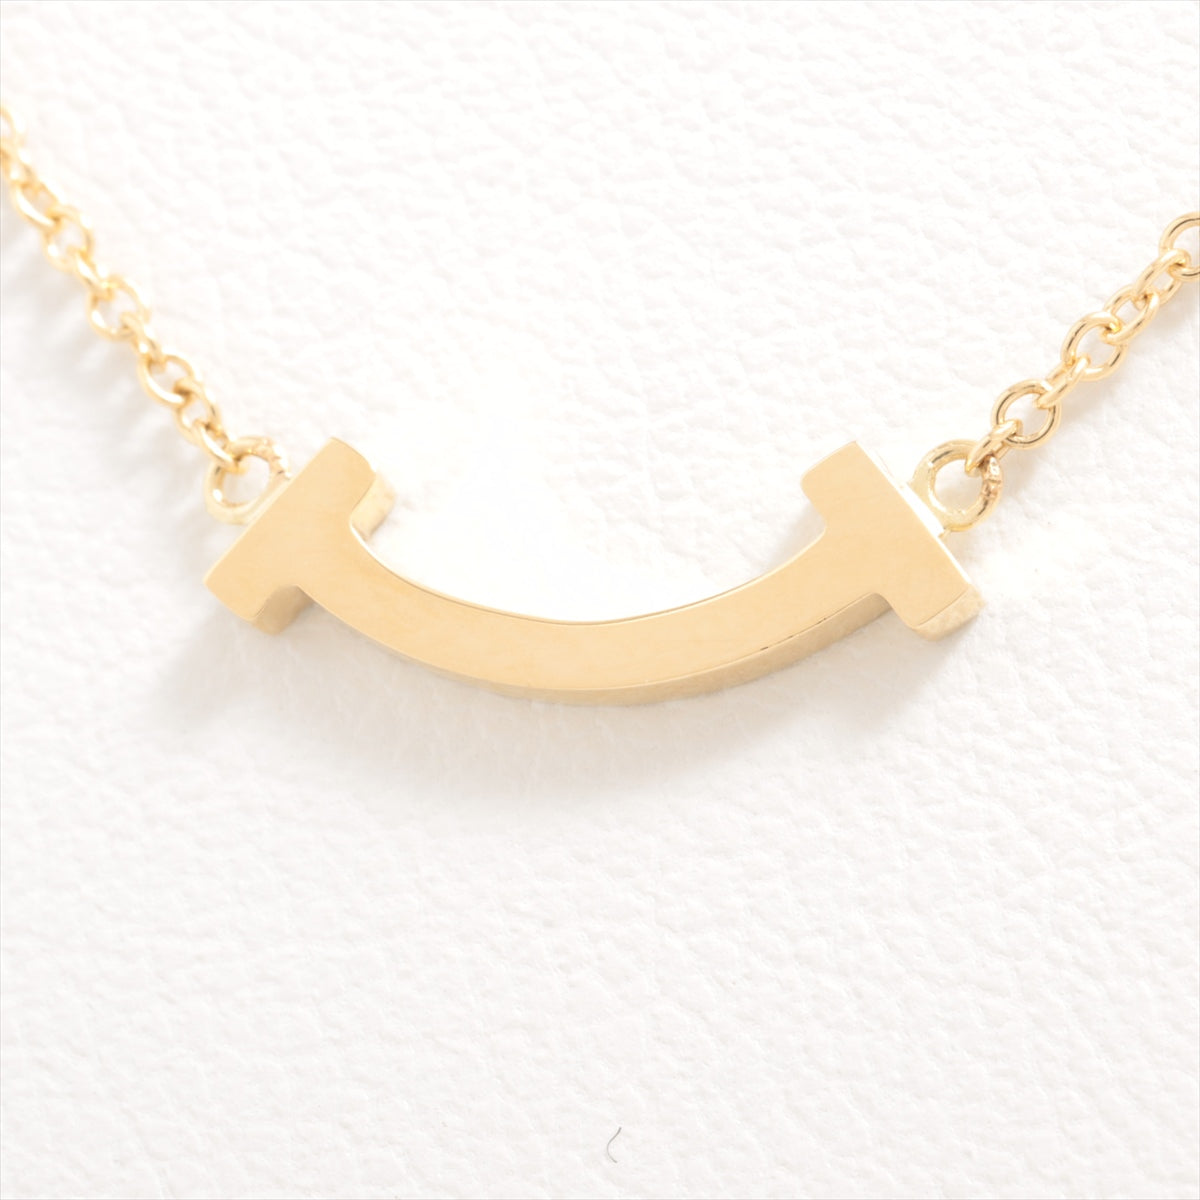 Sold at Auction: TIFFANY T SMILE 18KT ROSE GOLD PENDANT NECKLACE